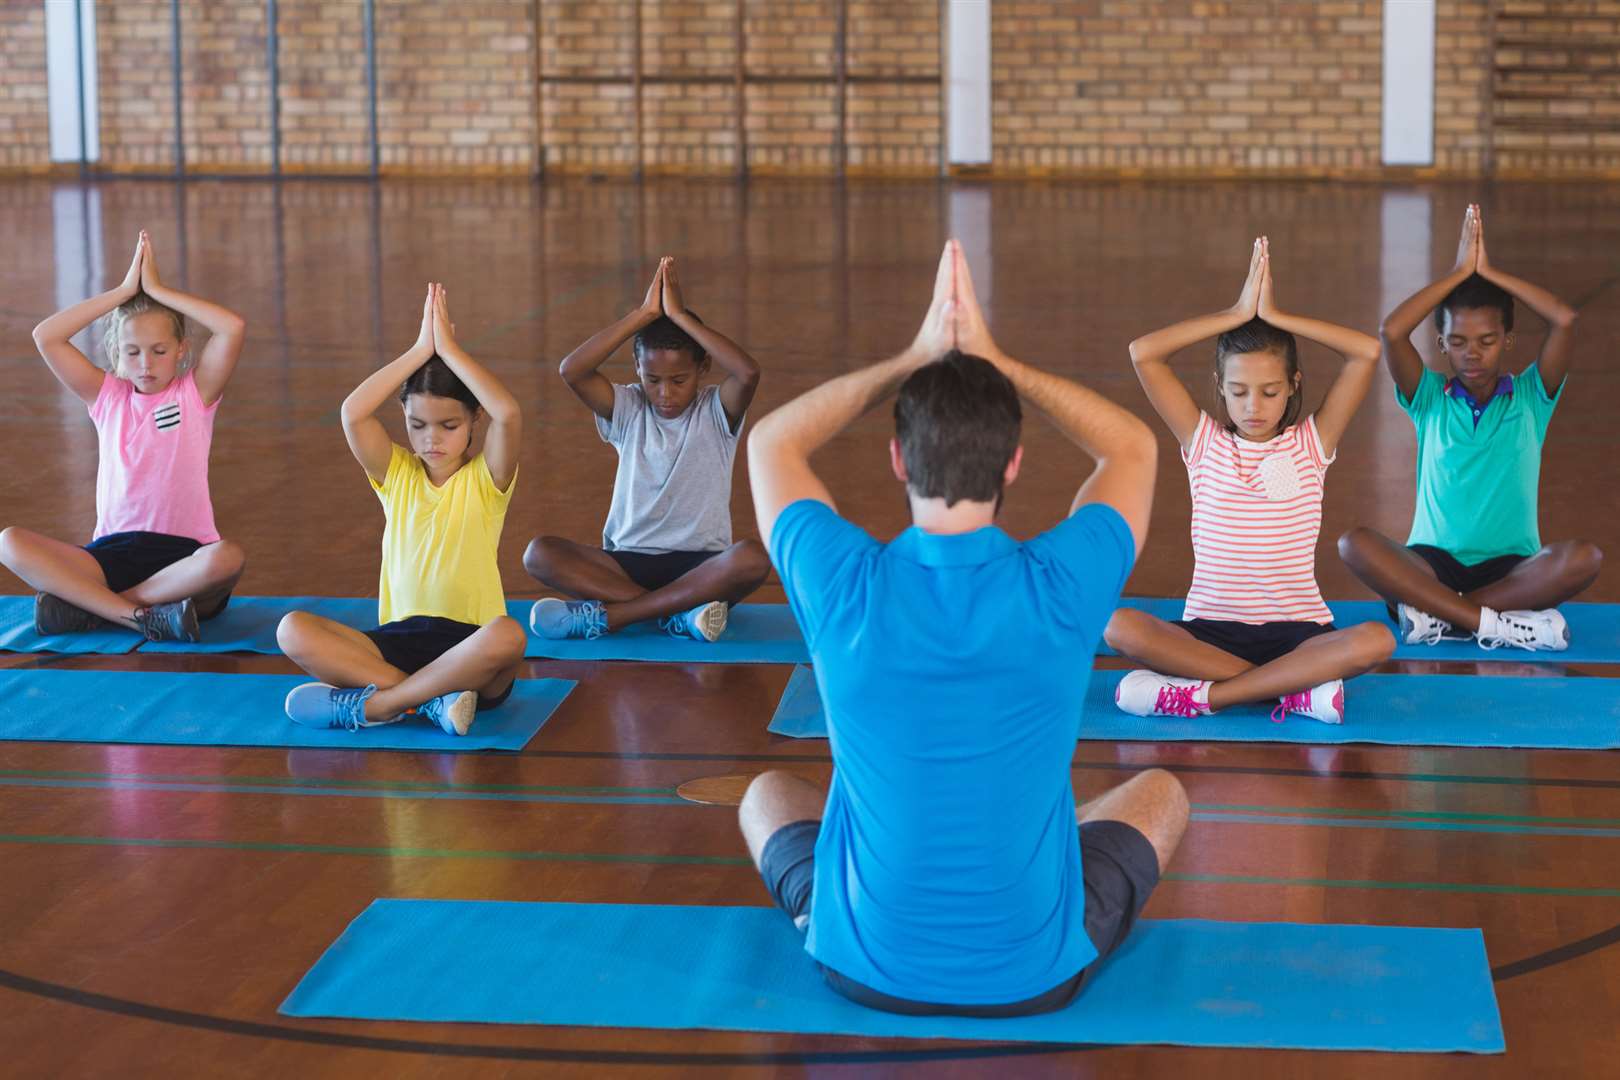 Expect to see more yoga classes for children in schools